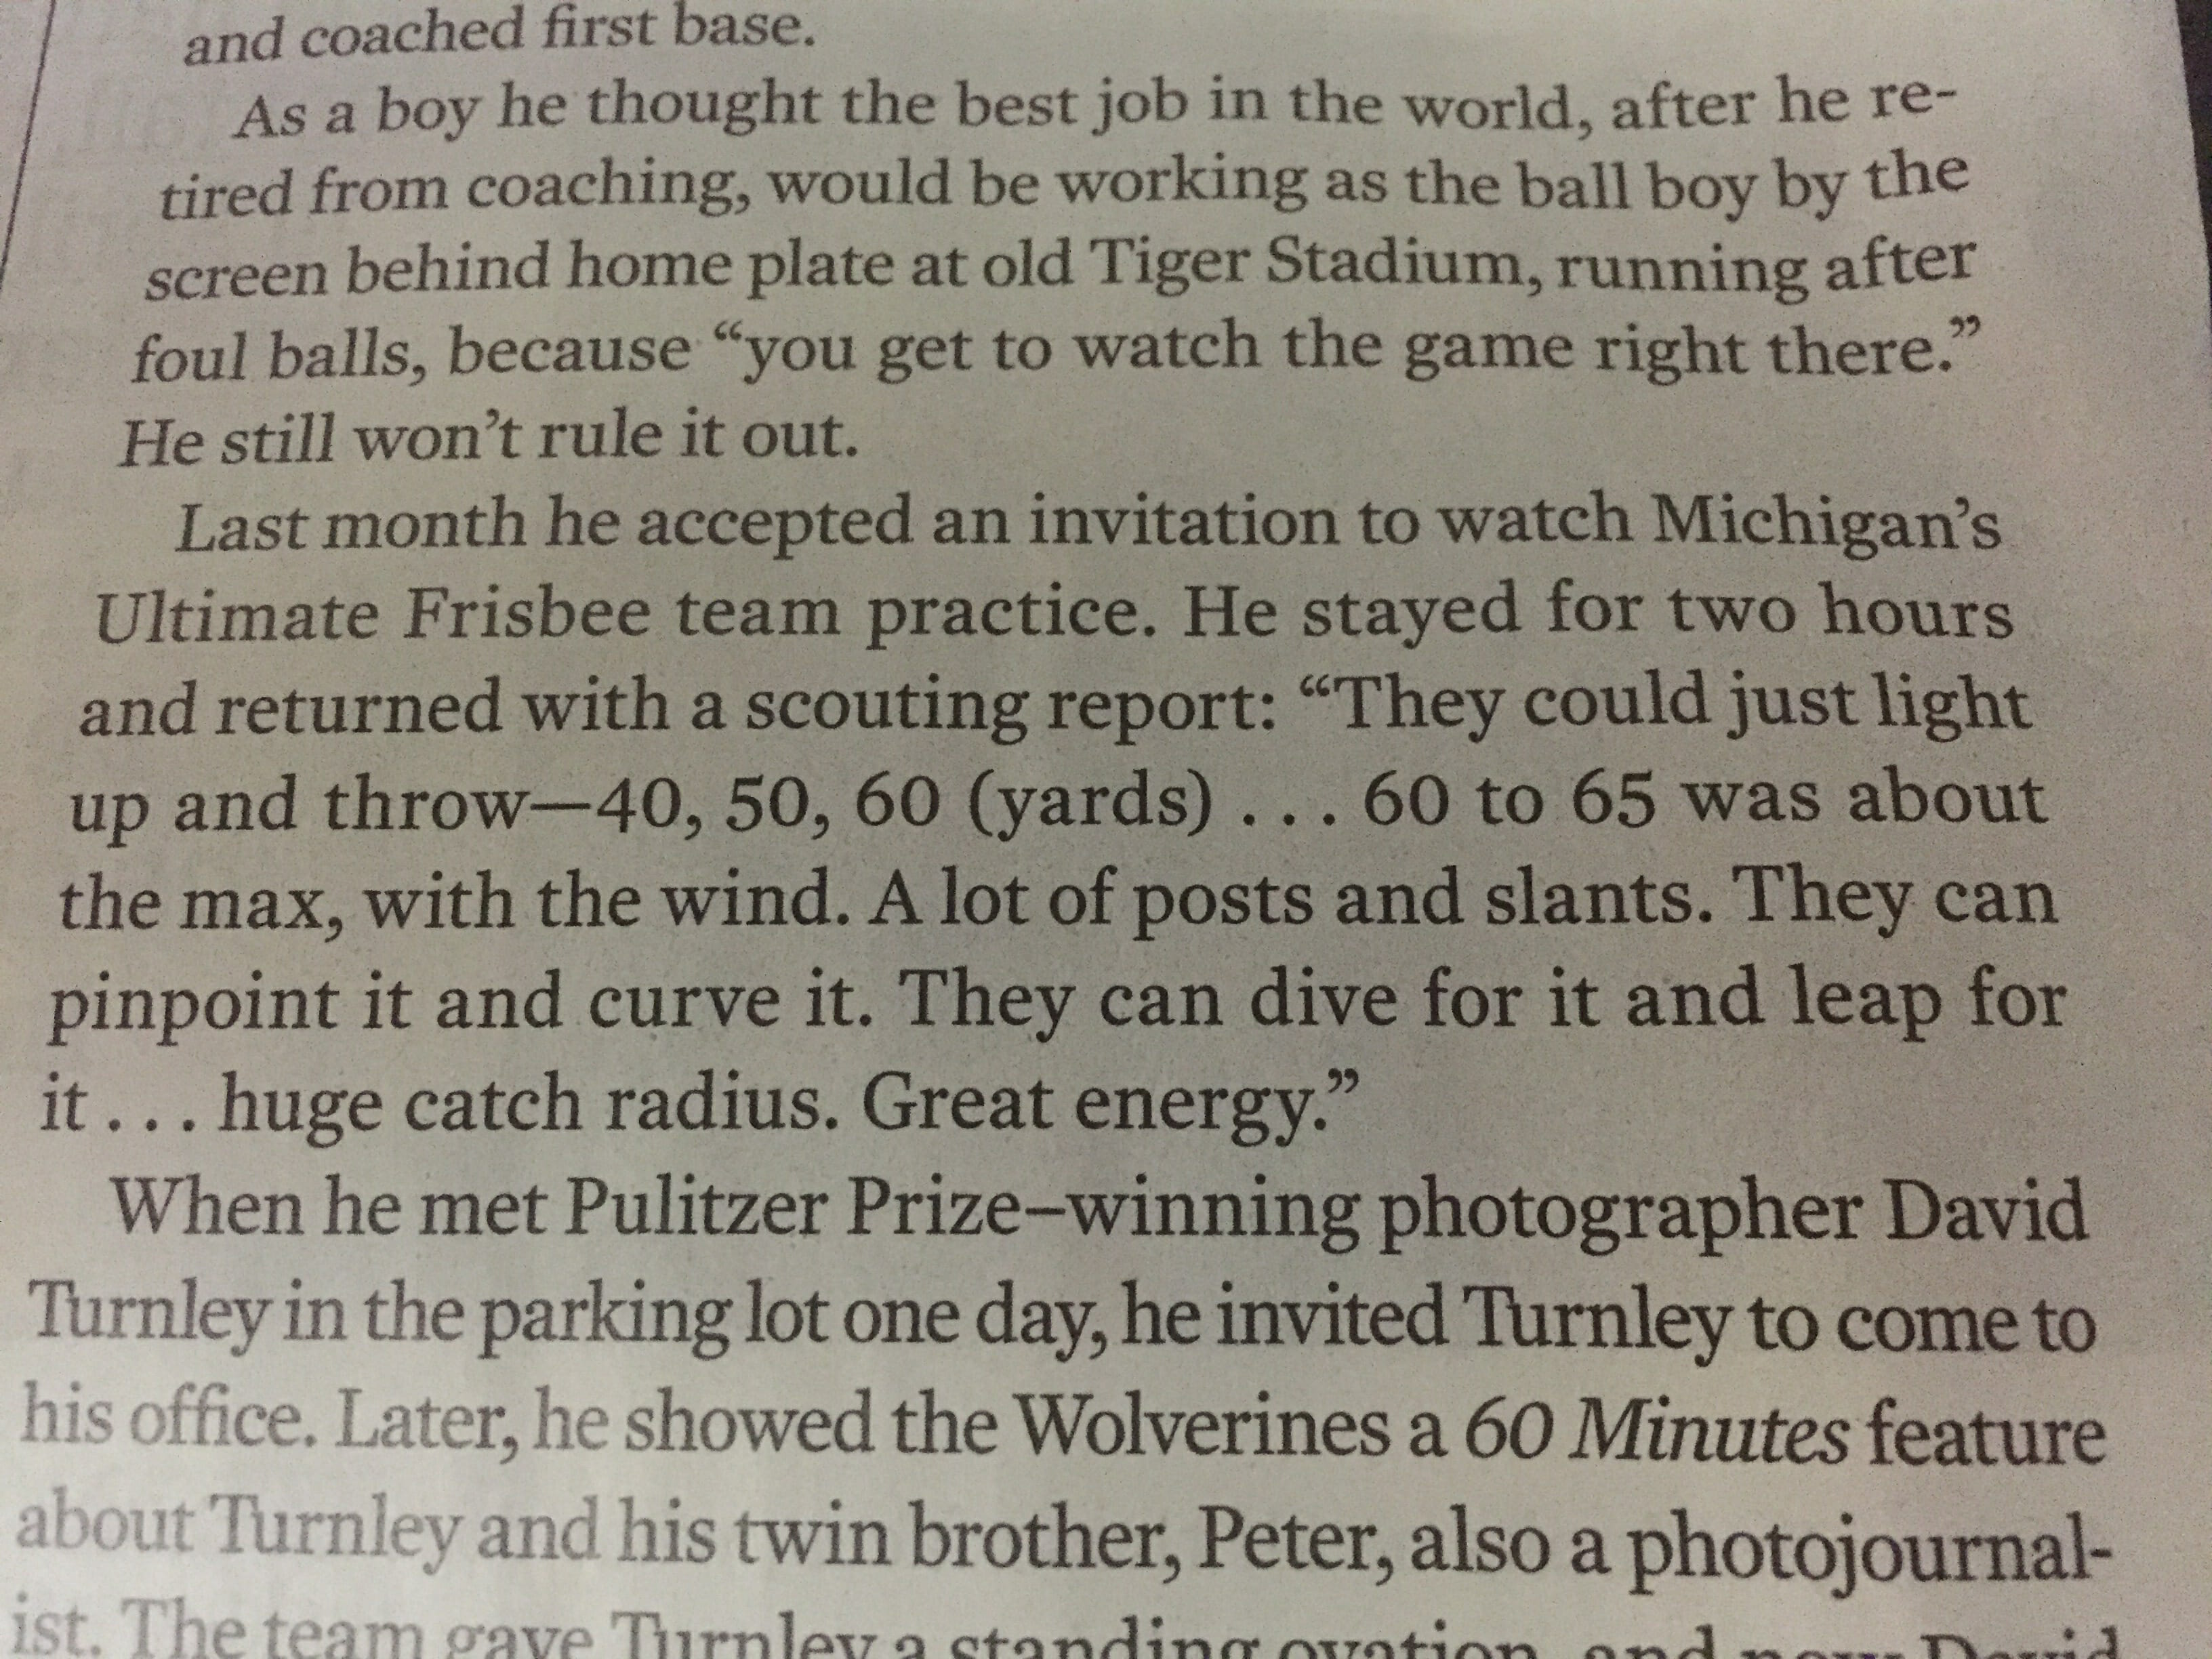 Jim Harbaugh Scouting Report on Ultimate Frisbee